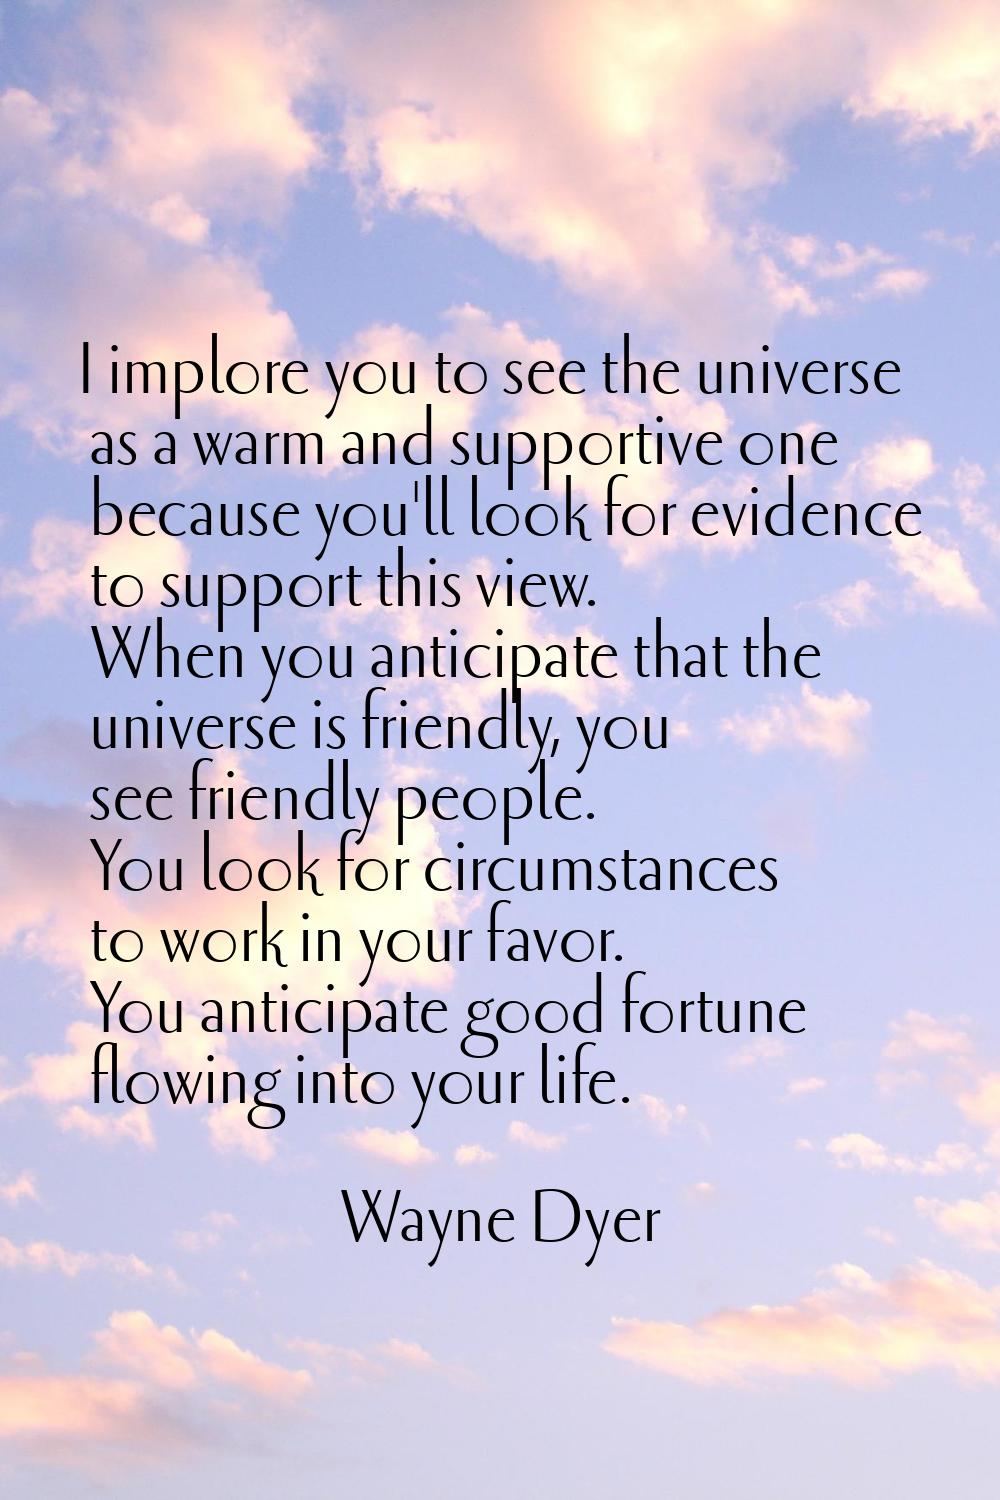 I implore you to see the universe as a warm and supportive one because you'll look for evidence to 